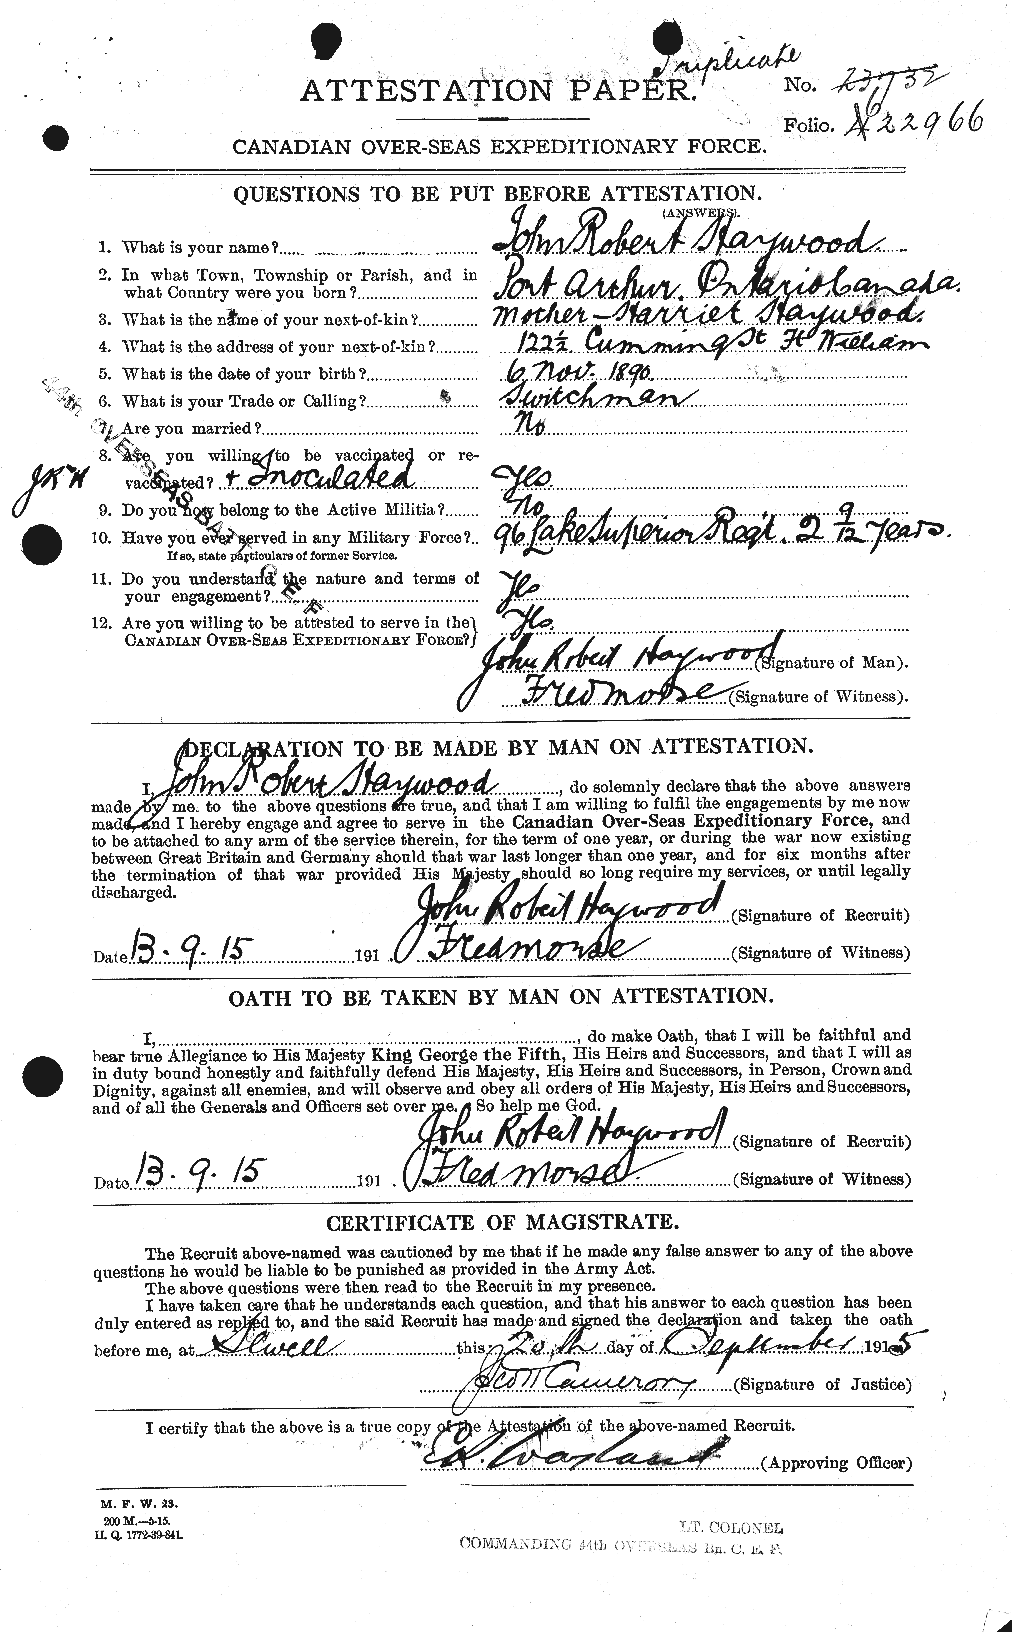 Personnel Records of the First World War - CEF 385999a